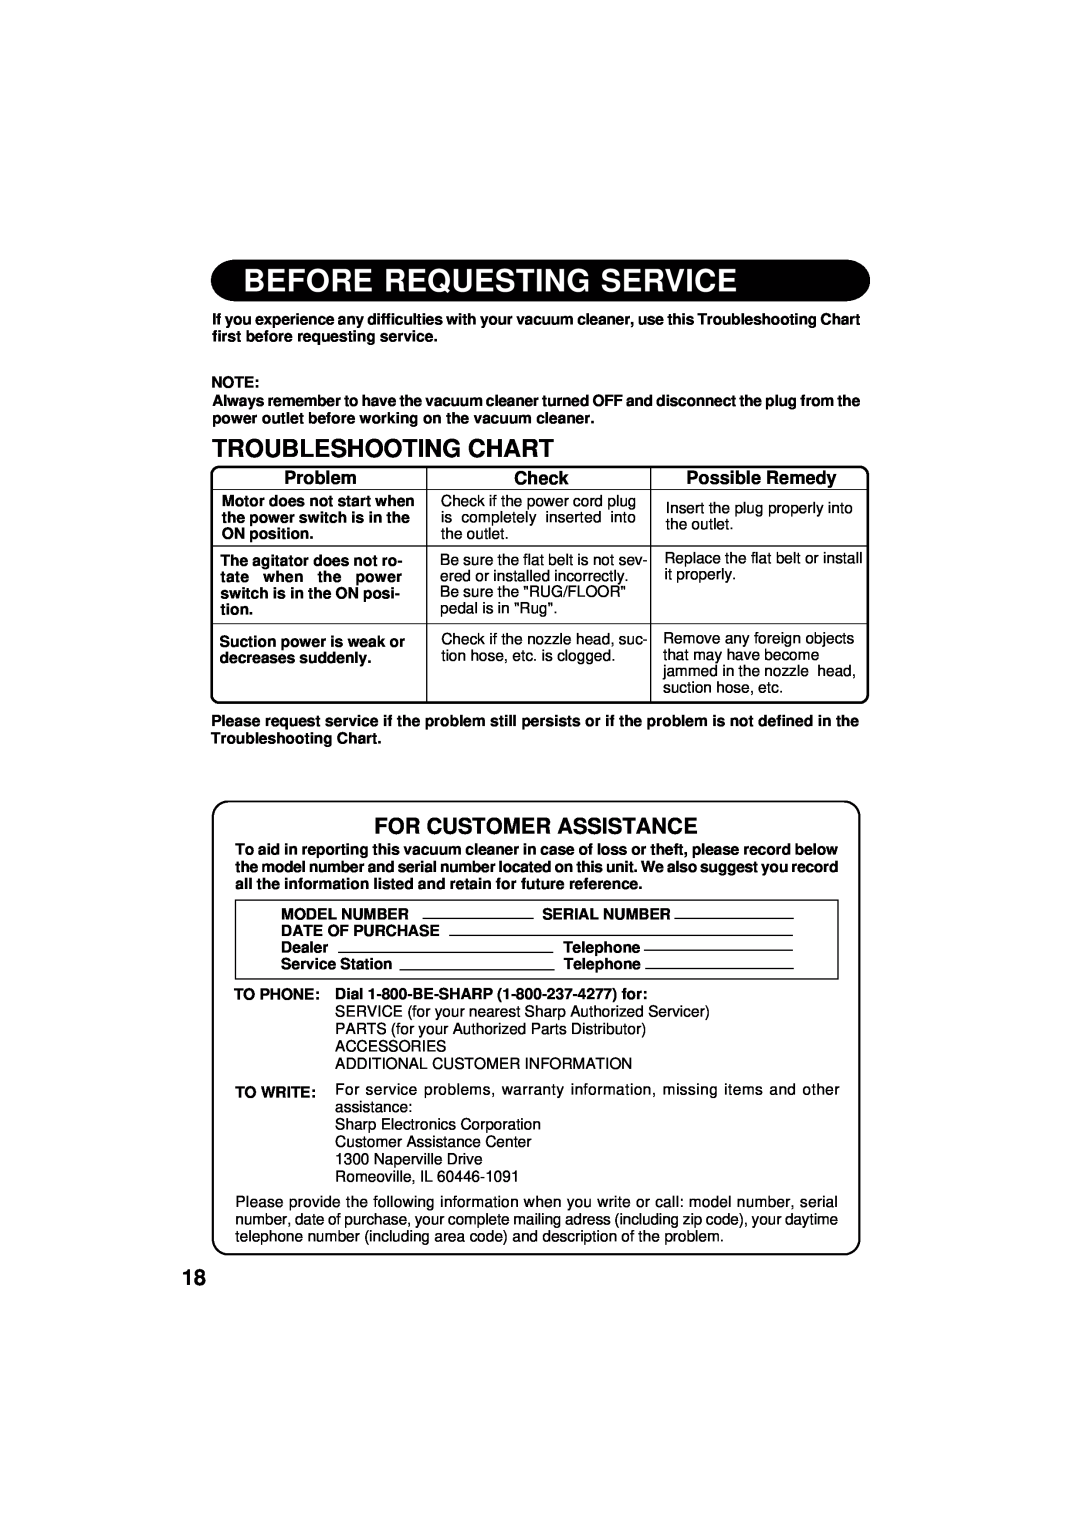 Sharp EC-S5170 Before Requesting Service, Troubleshooting Chart, For Customer Assistance, Problem, Check, Possible Remedy 